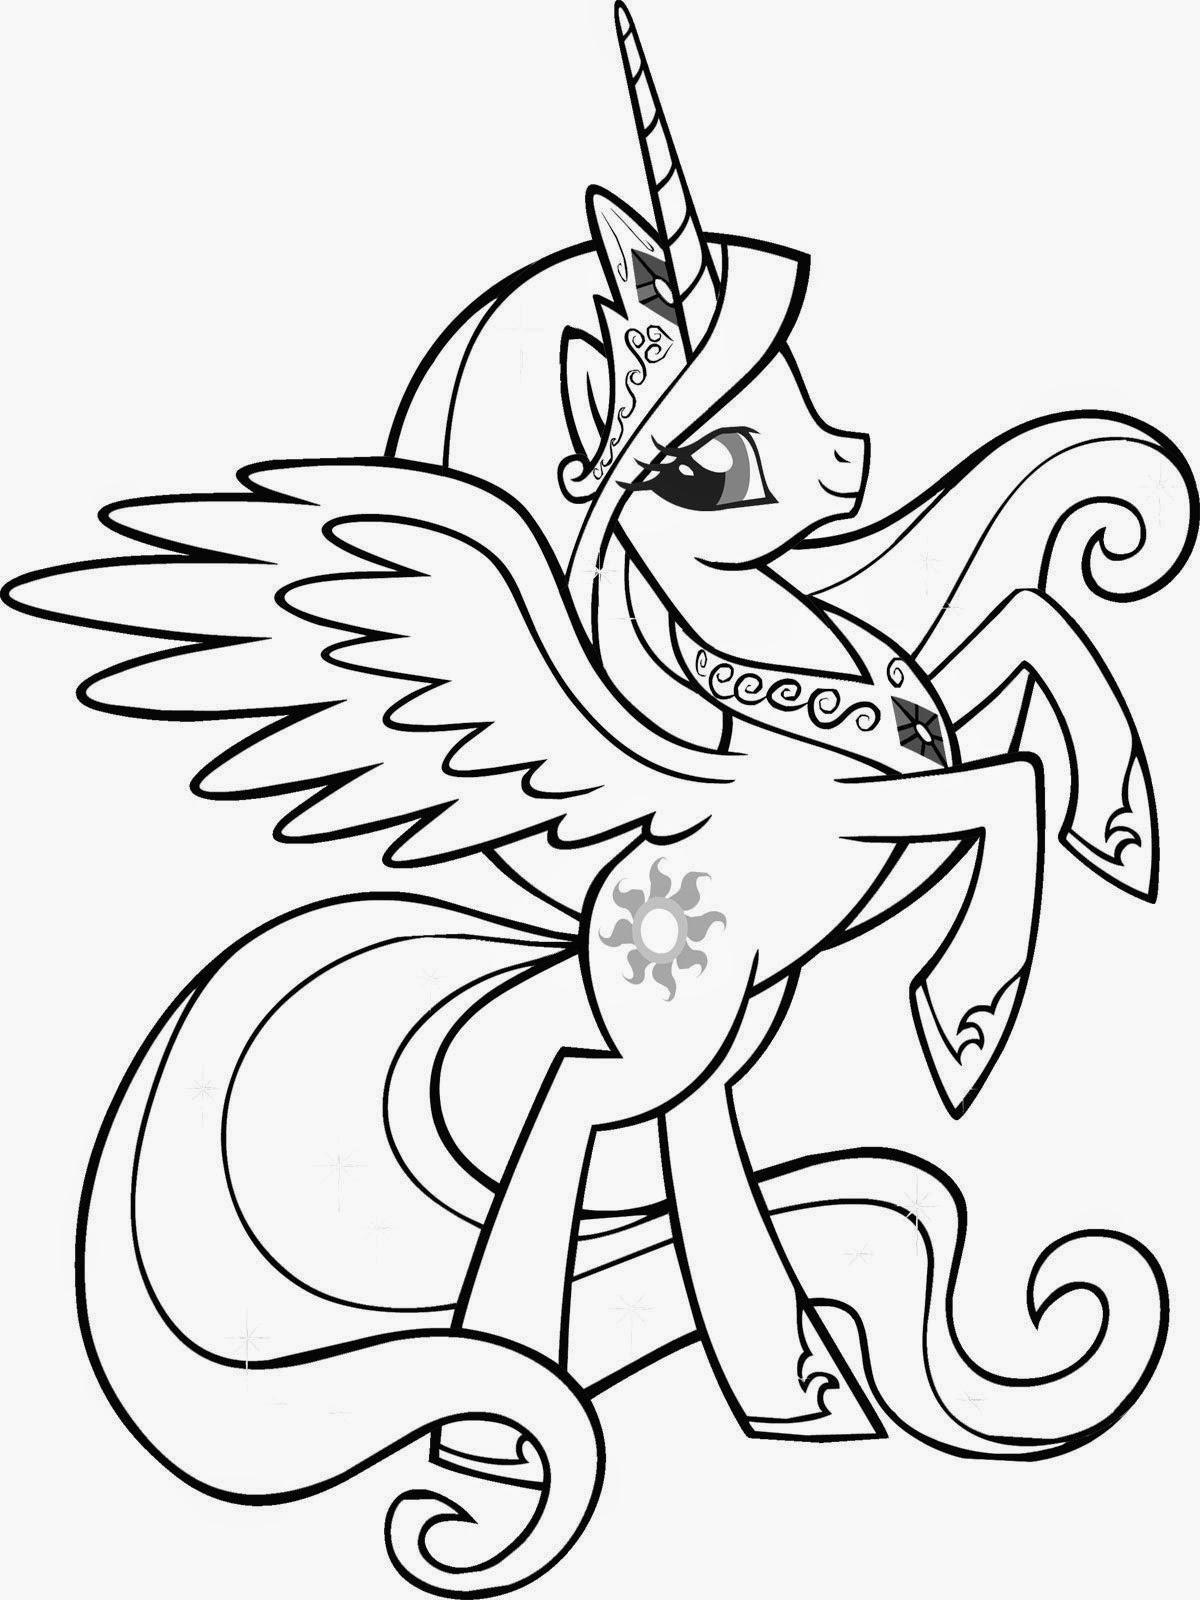 Coloring Pages Of Unicorns 9